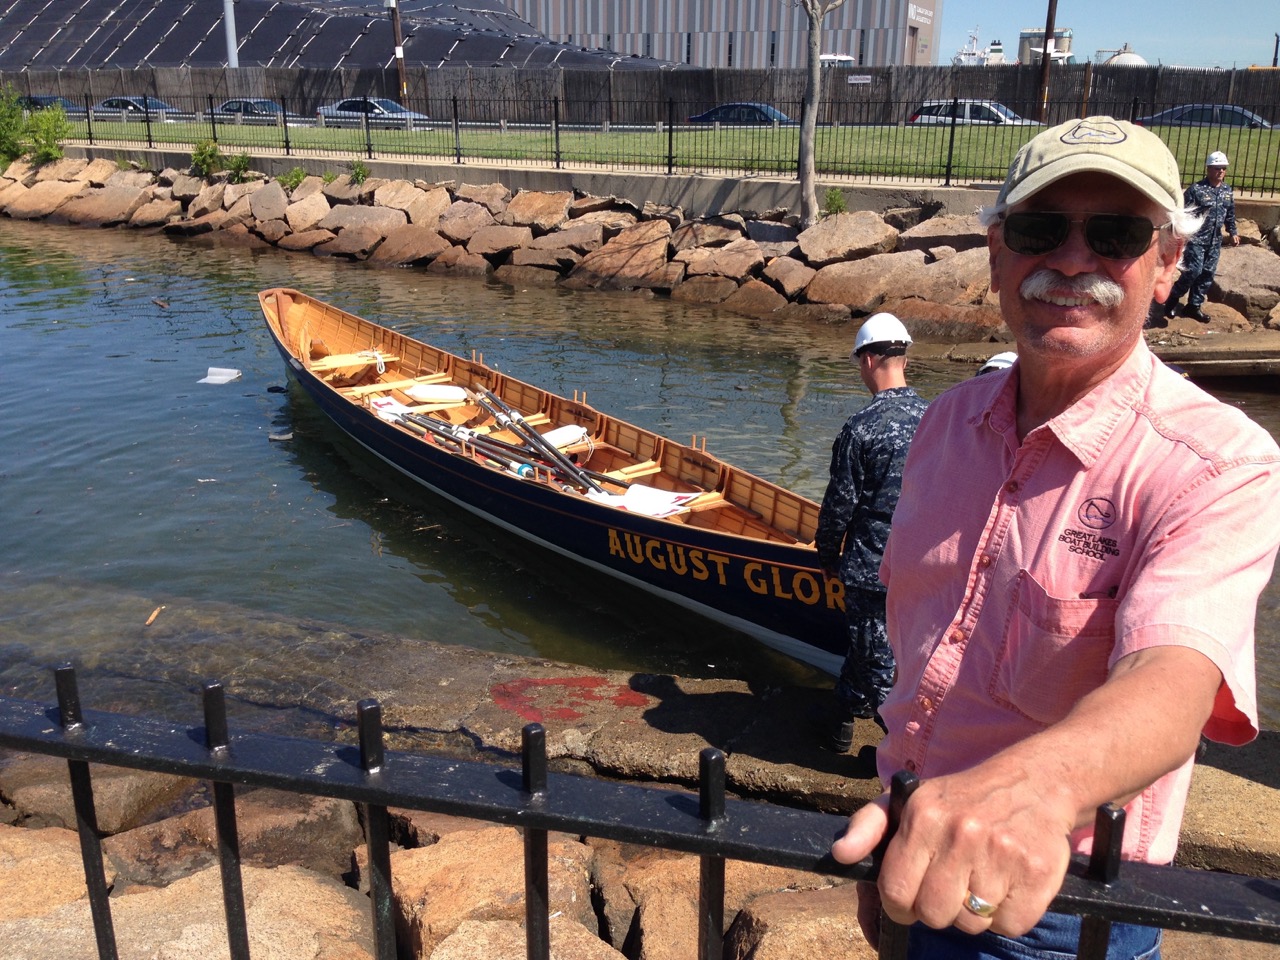 Pat at the historic Charlestown Naval Yard in Boston, MA watching the launching of the pilot gig August Glory by the US Navy that was built by his students at that Great Lakes Boat Building School to compliment the USS Constitution.